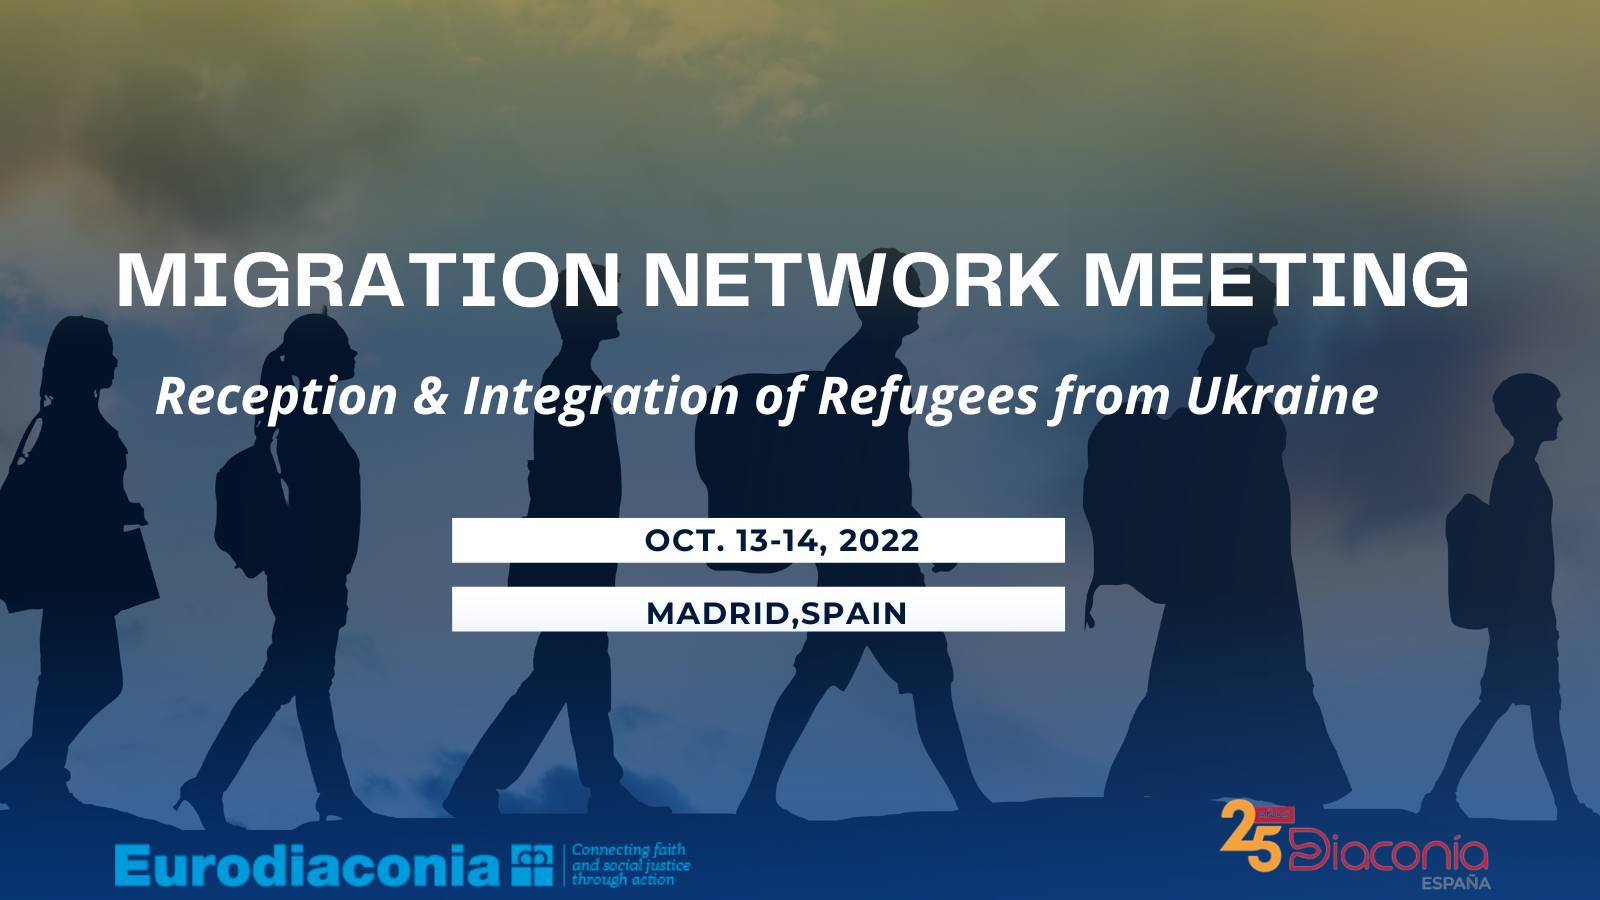 Migration Network Meeting - For Members Only